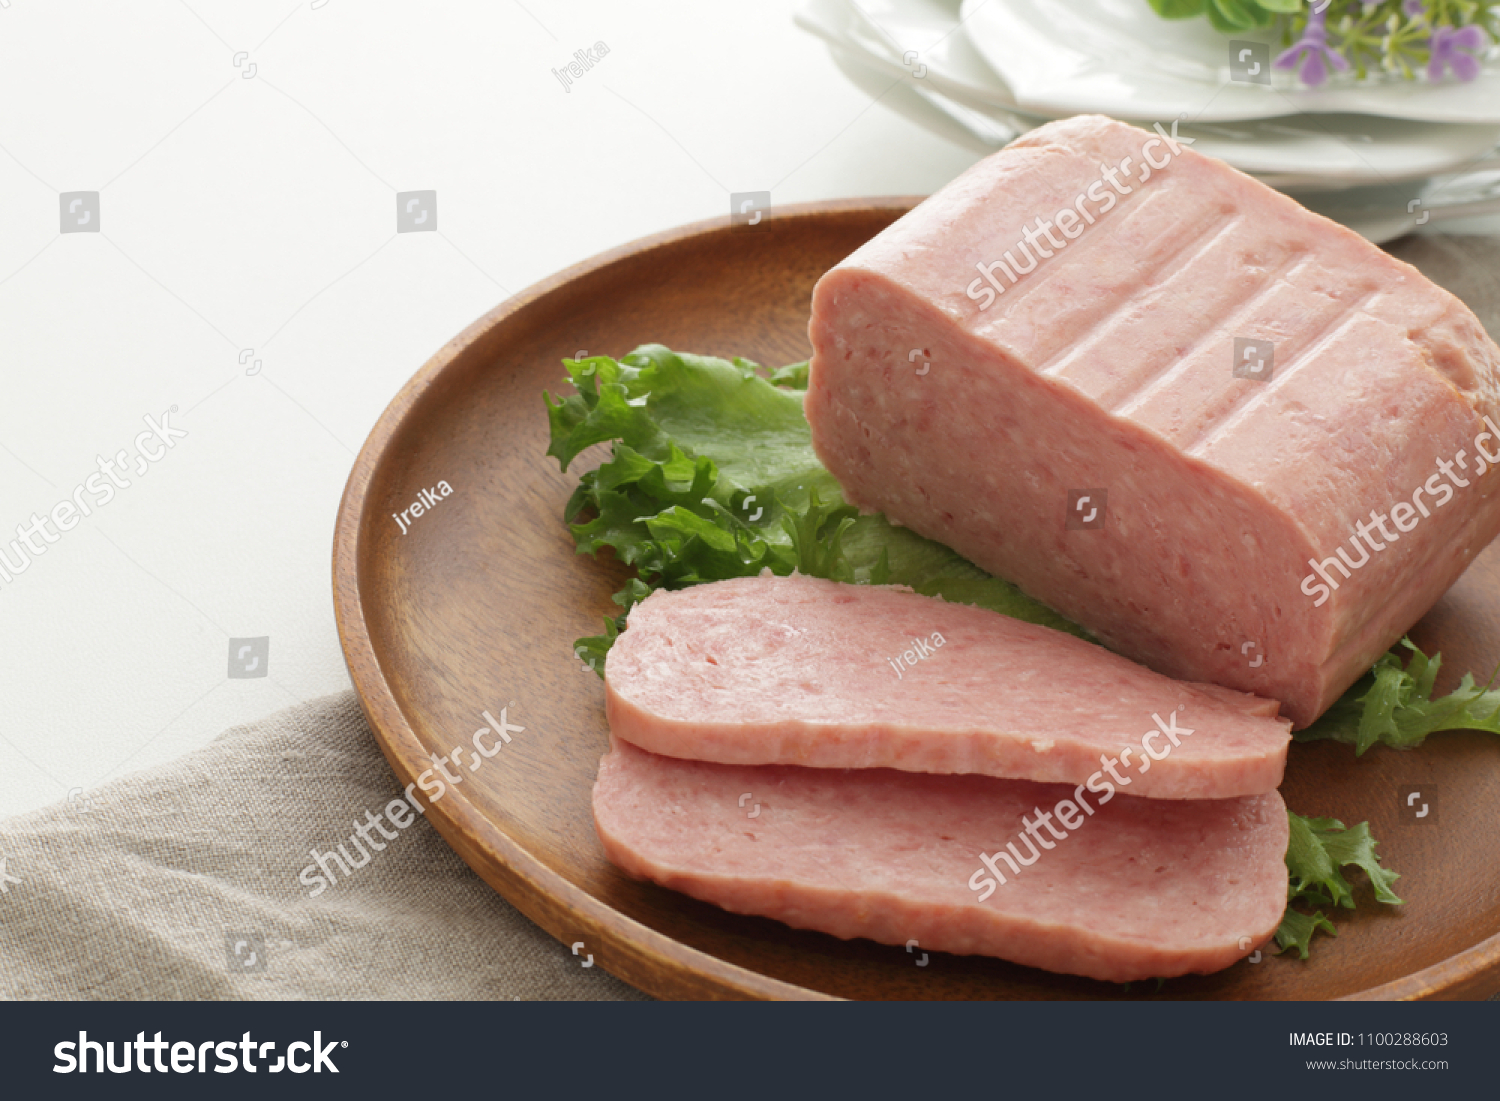 Sliced luncheon meat on wooden plate #1100288603